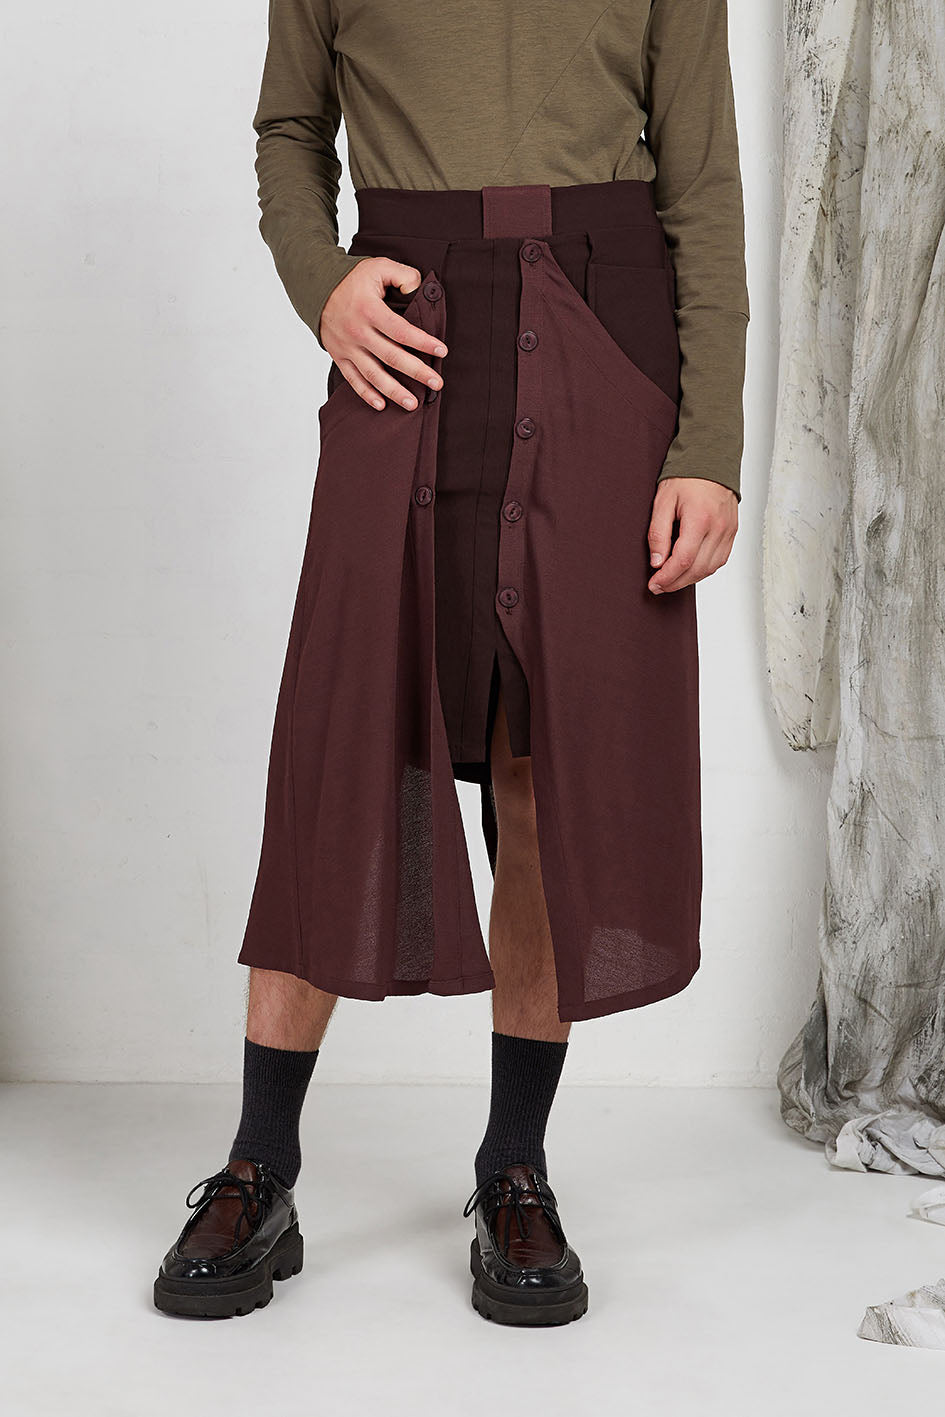 Tailored Menswear Unisex Skirt with Button off Drape Panels and pockets